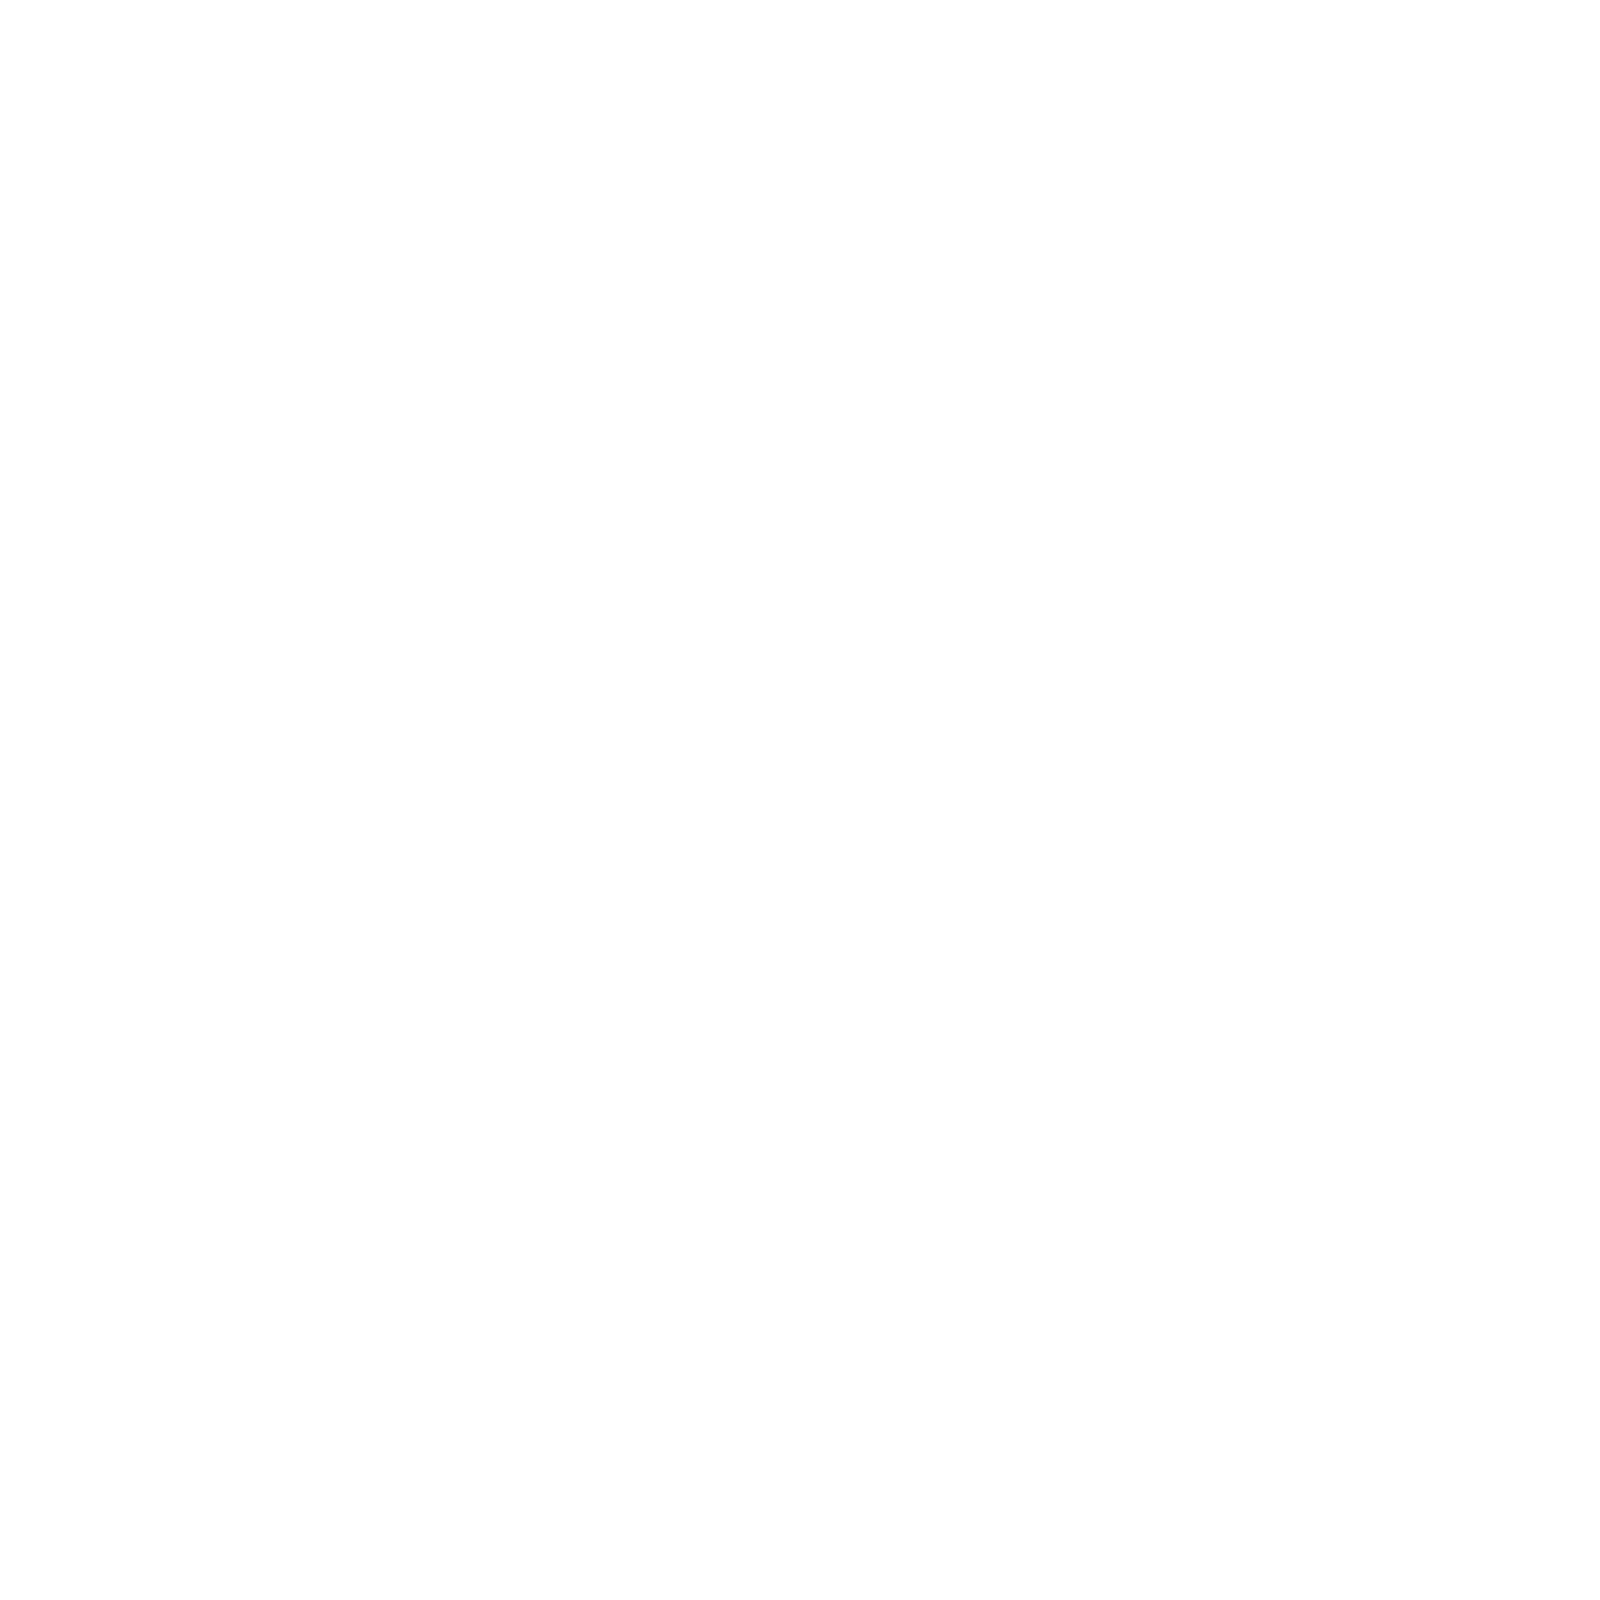 The Smile Brand